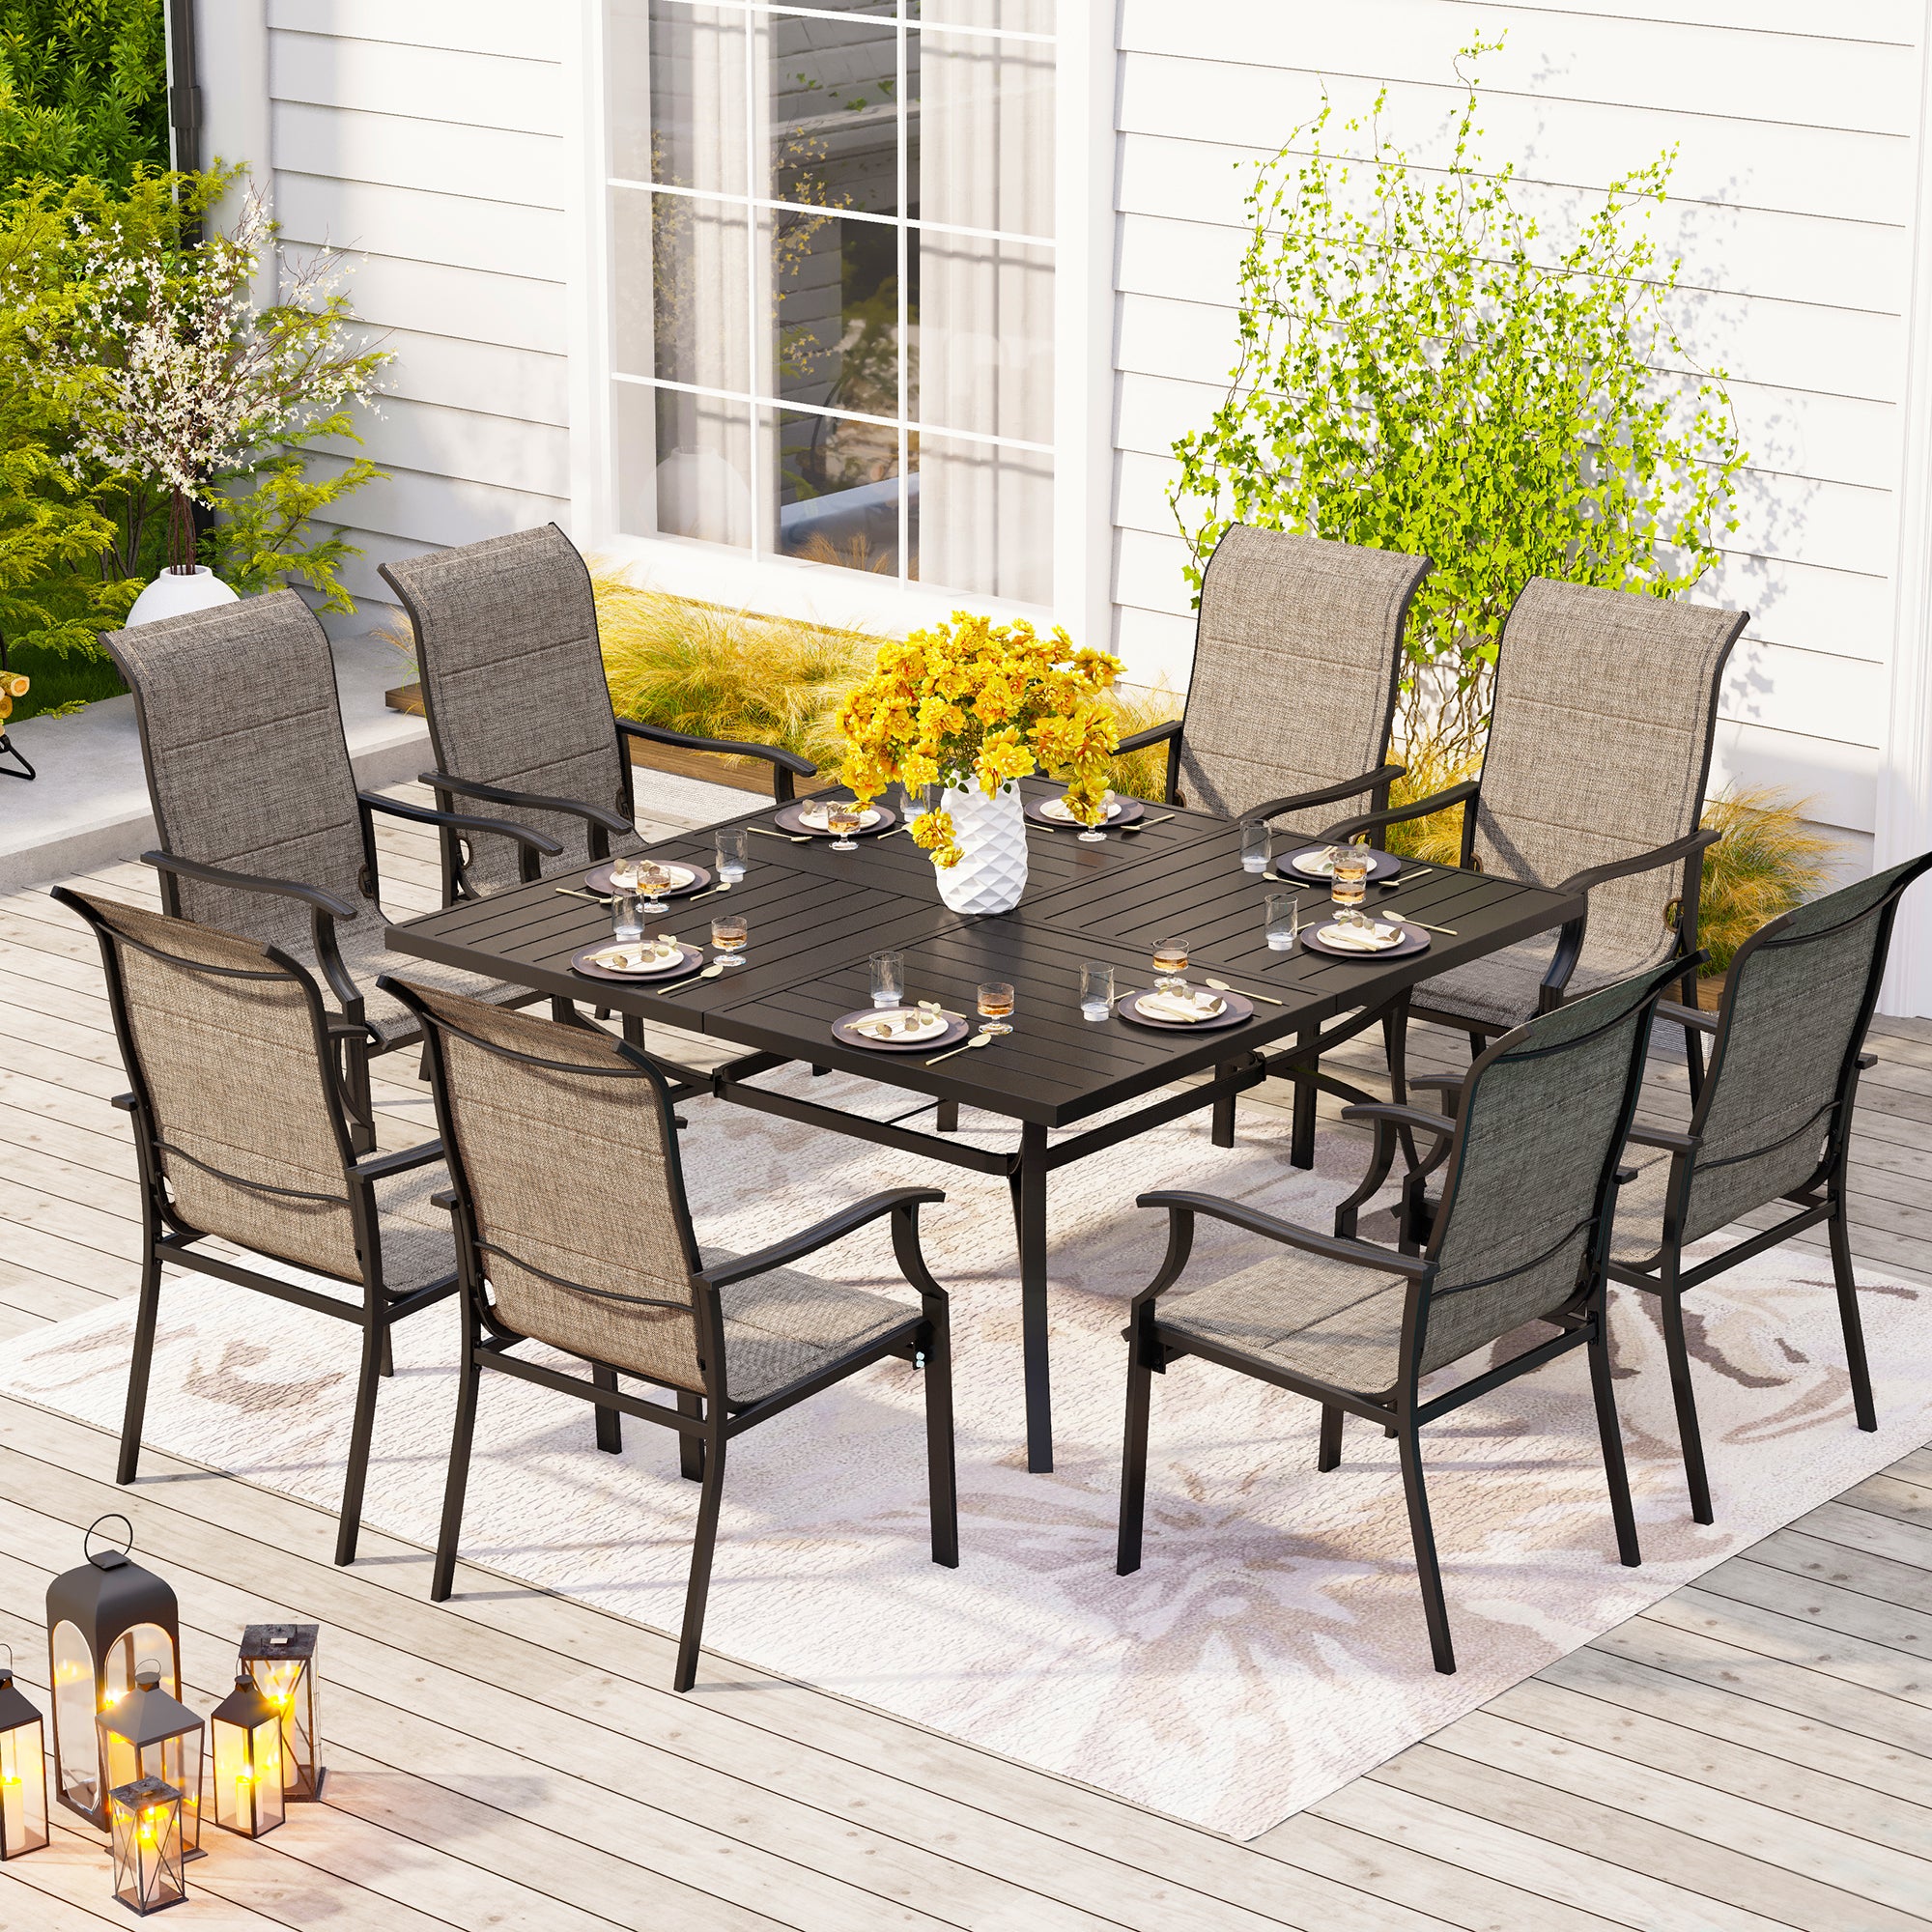 PHI VILLA 9-Piece Wrought Square Table & Padded High-back Textilene Chair Patio Dining Set